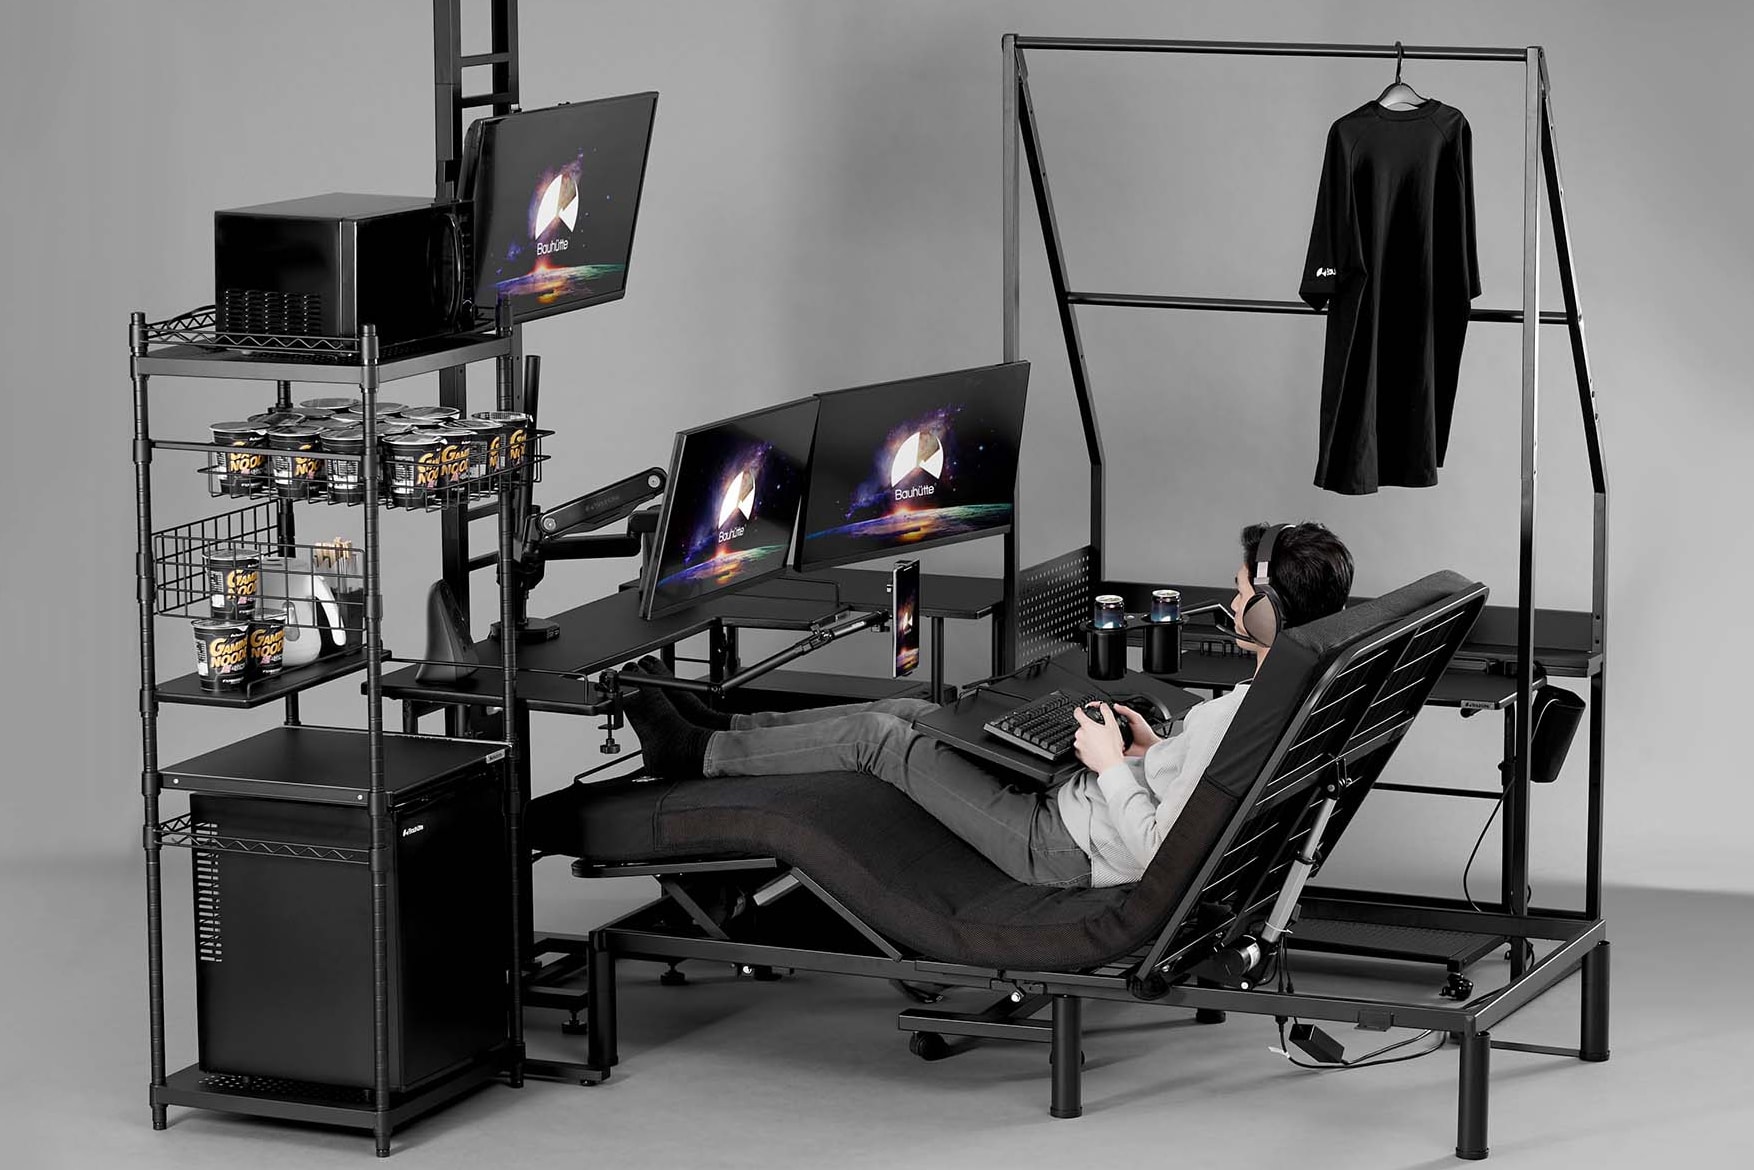 Bauhutte electric gaming bed BGB-100FA release Japan Gaming Chairs home furniture 